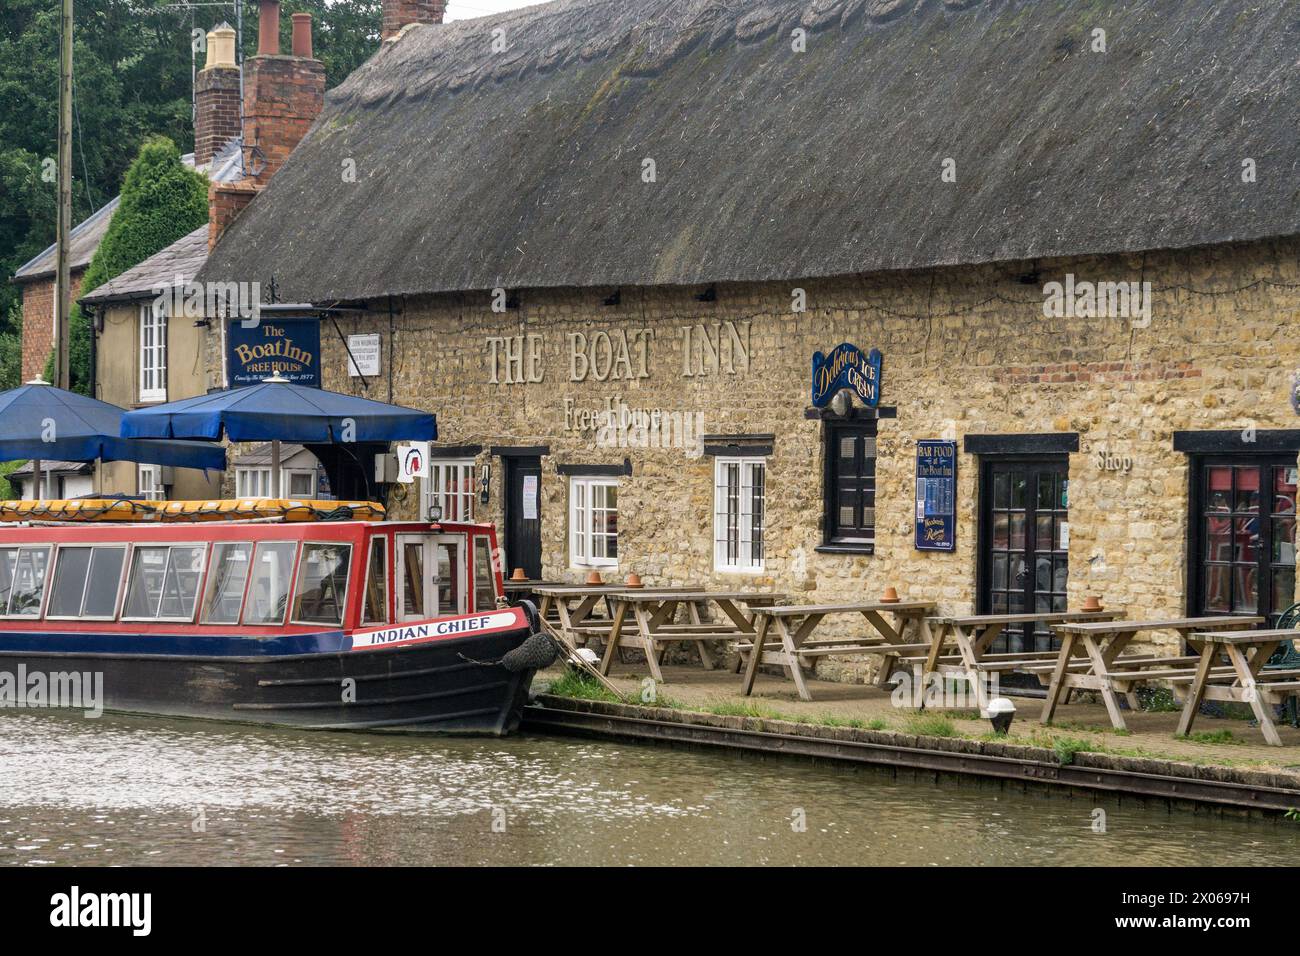 Narrowboat Indian Chief moored outside the Boat Inn on the Grand Union canal at Stoke Bruerne, Northamptonshire, UK Stock Photo